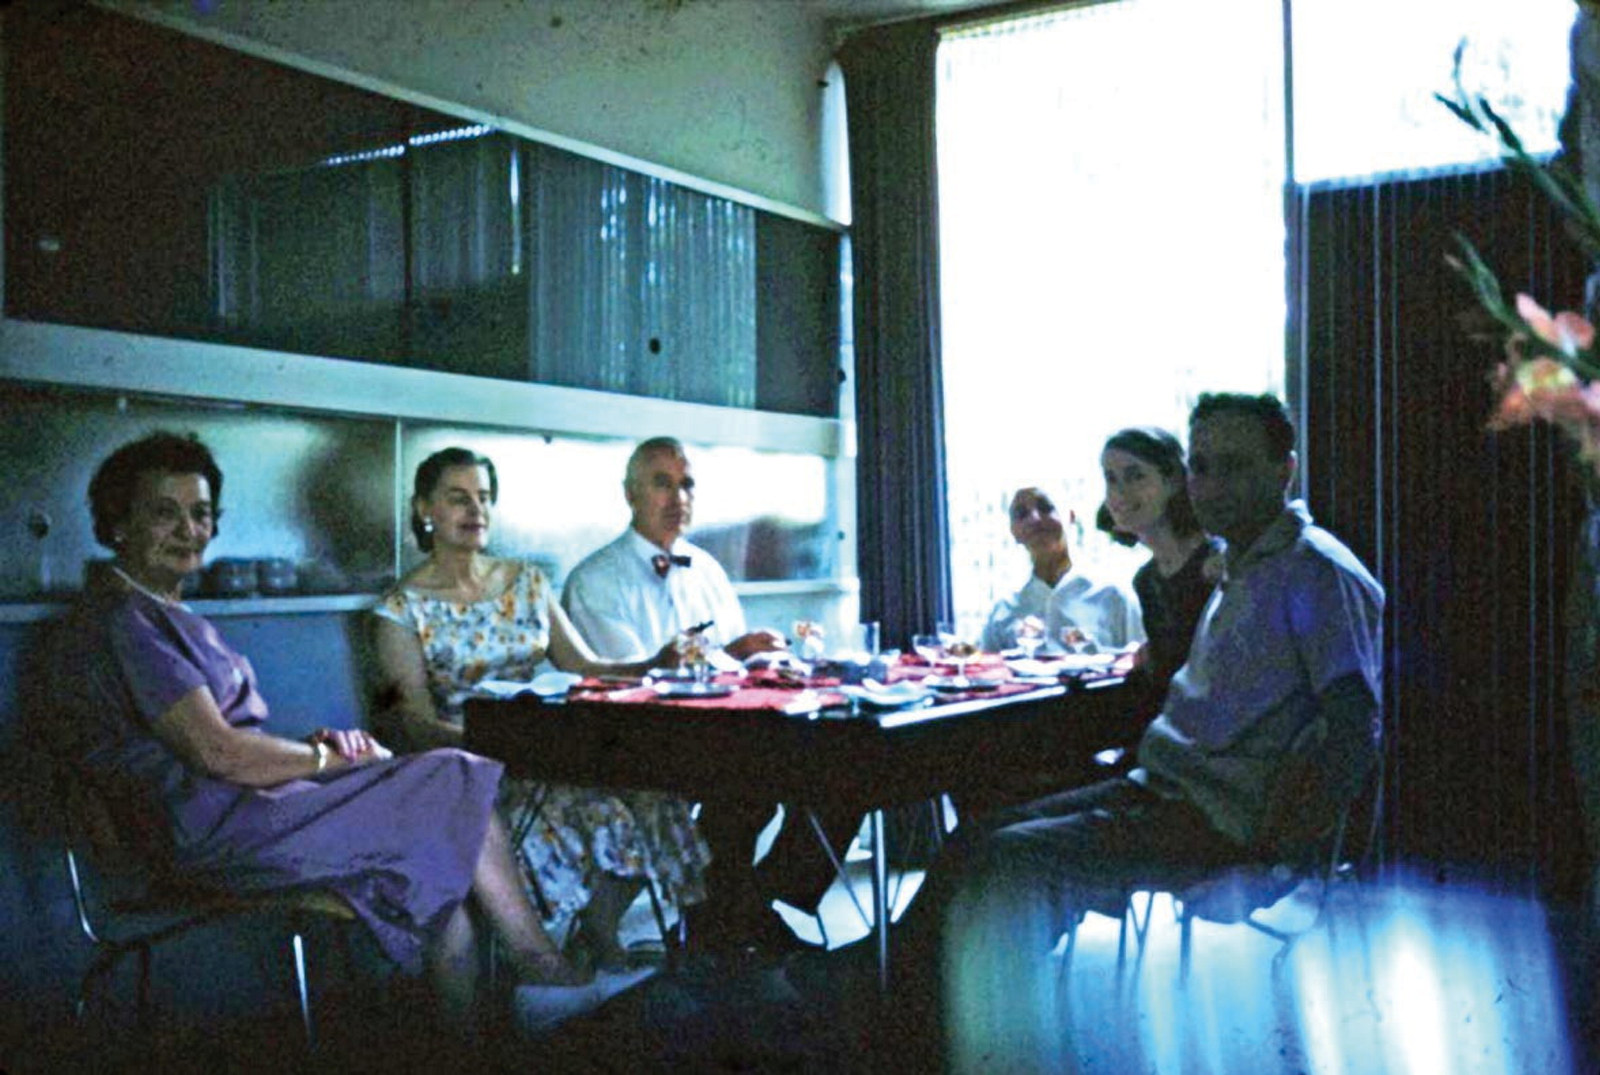 Group seated around dining table in front of kitchen area.